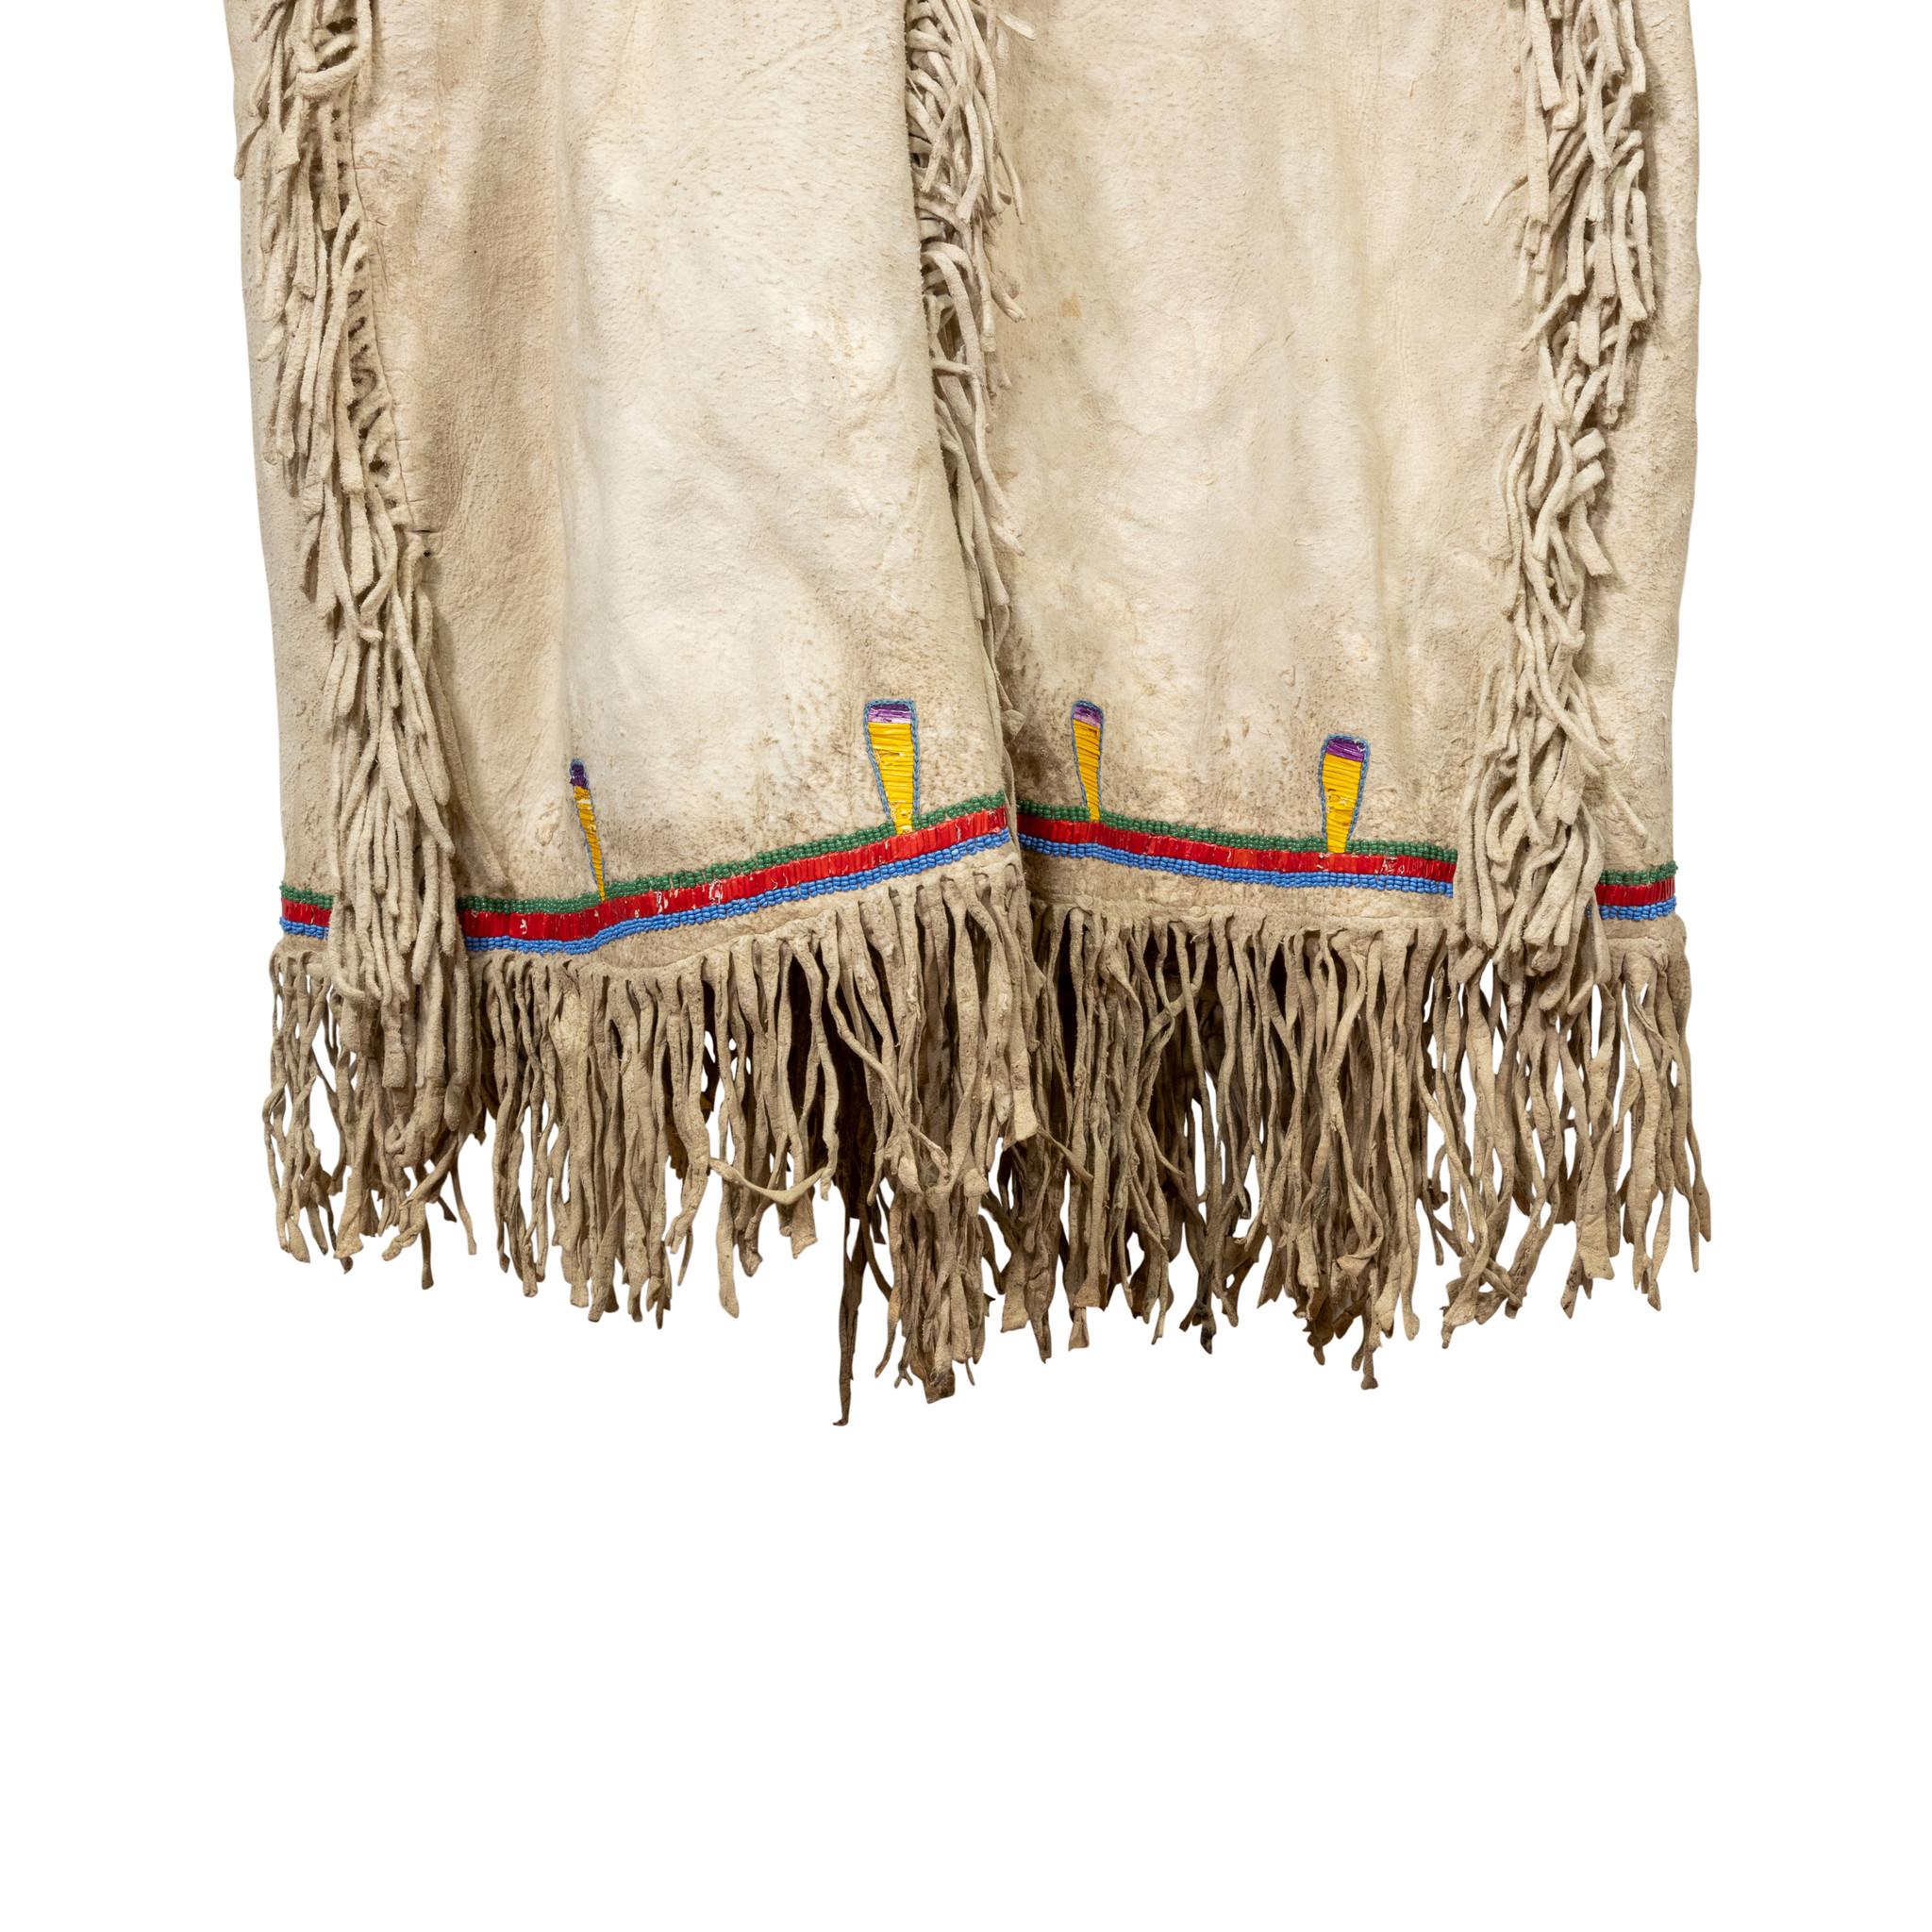 Hidatsa Arikara medicine shirt worn by a warrior who deserved honors, pre-reservation. Horseshoes represent successful horse raids, and the six quilled eagle feathers signify war coups, scalps or battles. Would note, four real scalps possibly moved